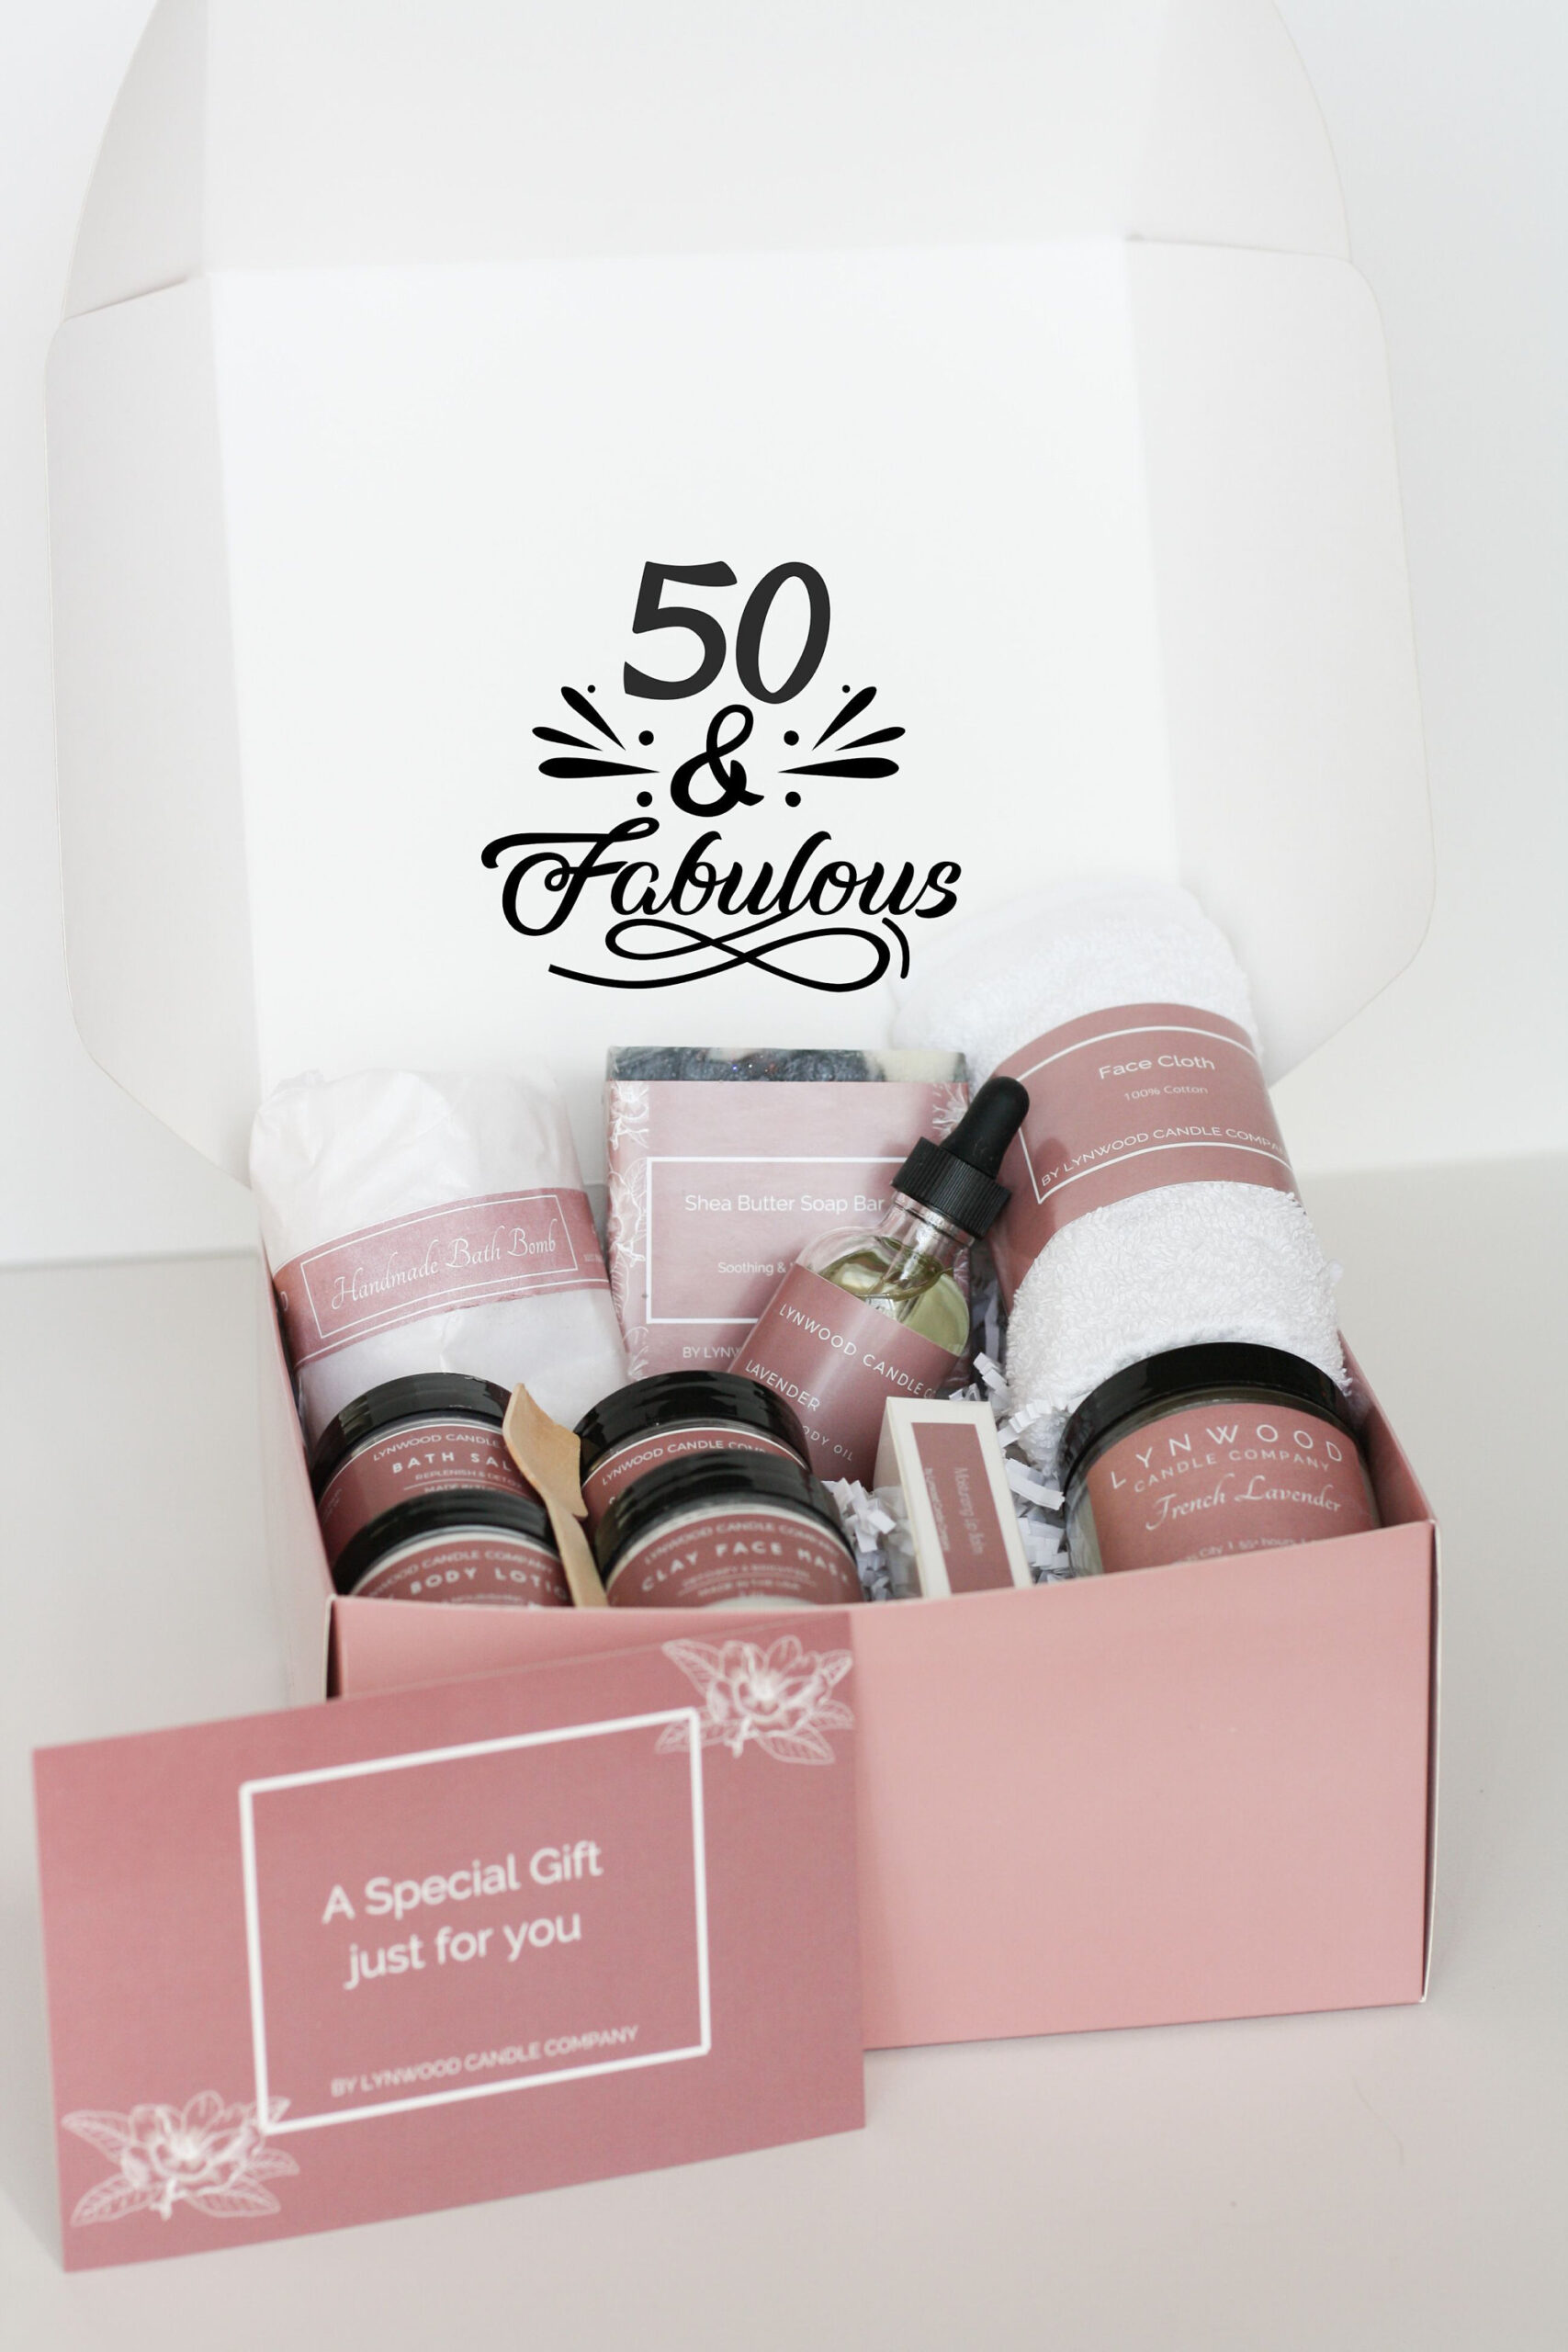 50th birthday gift ideas for someone special